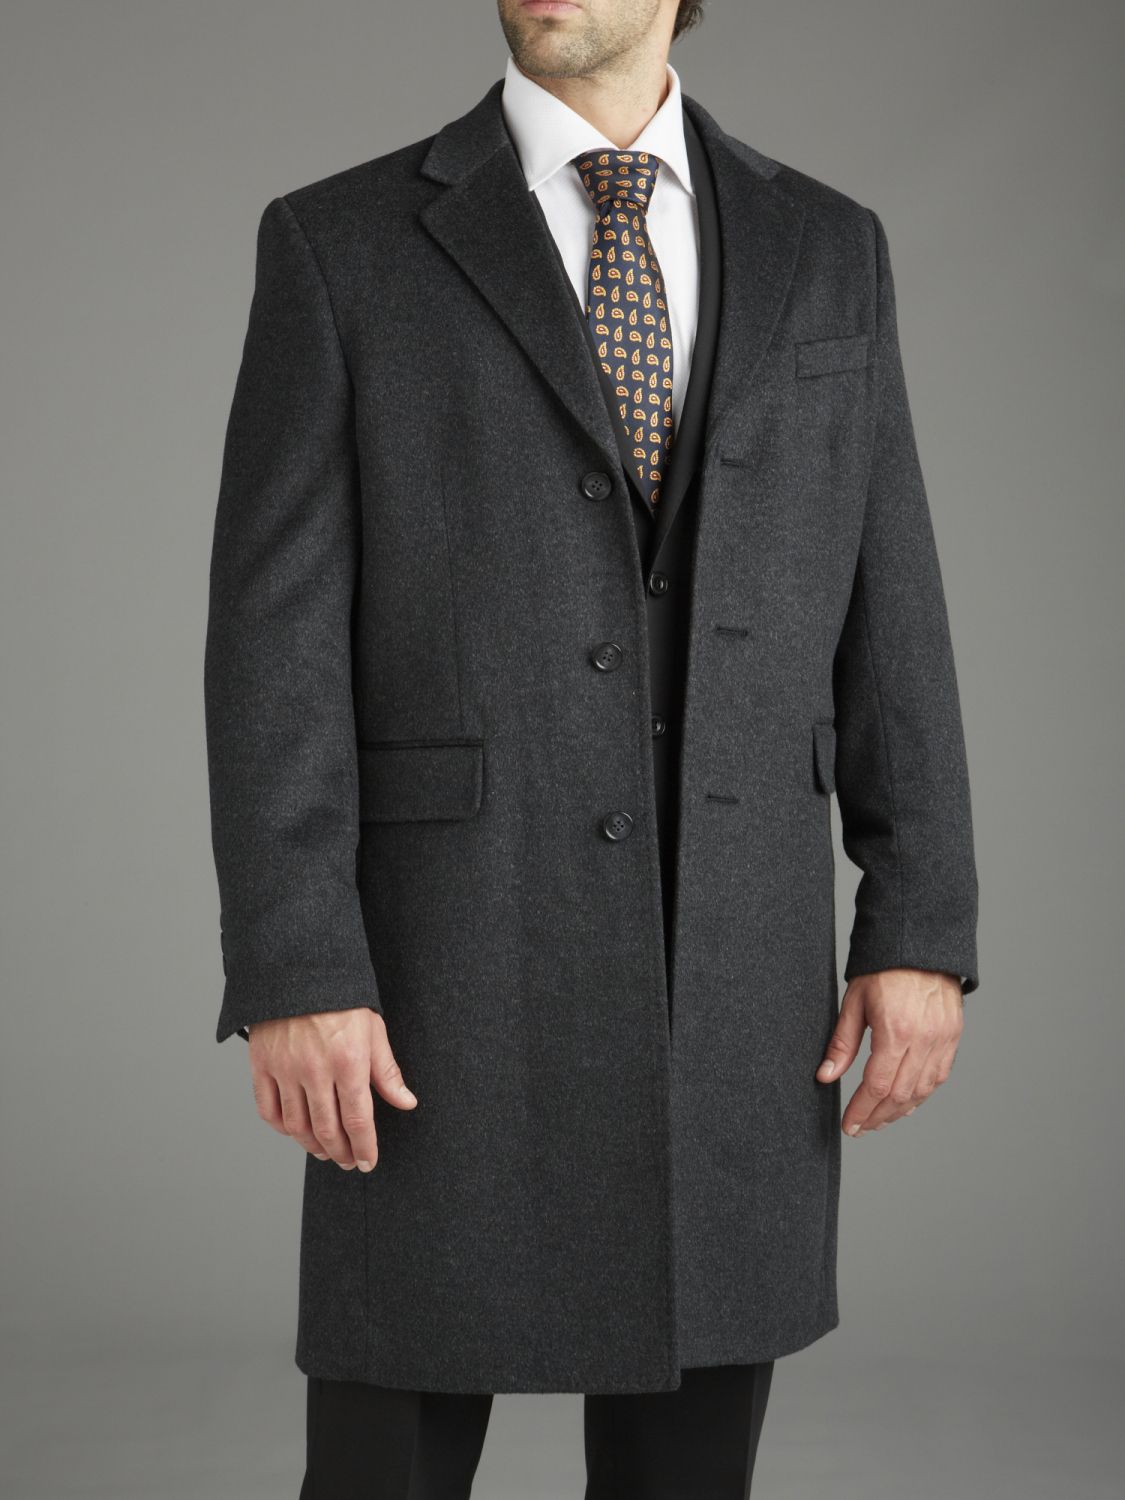 Paul costelloe Potter Single Breasted Coat in Gray for Men | Lyst